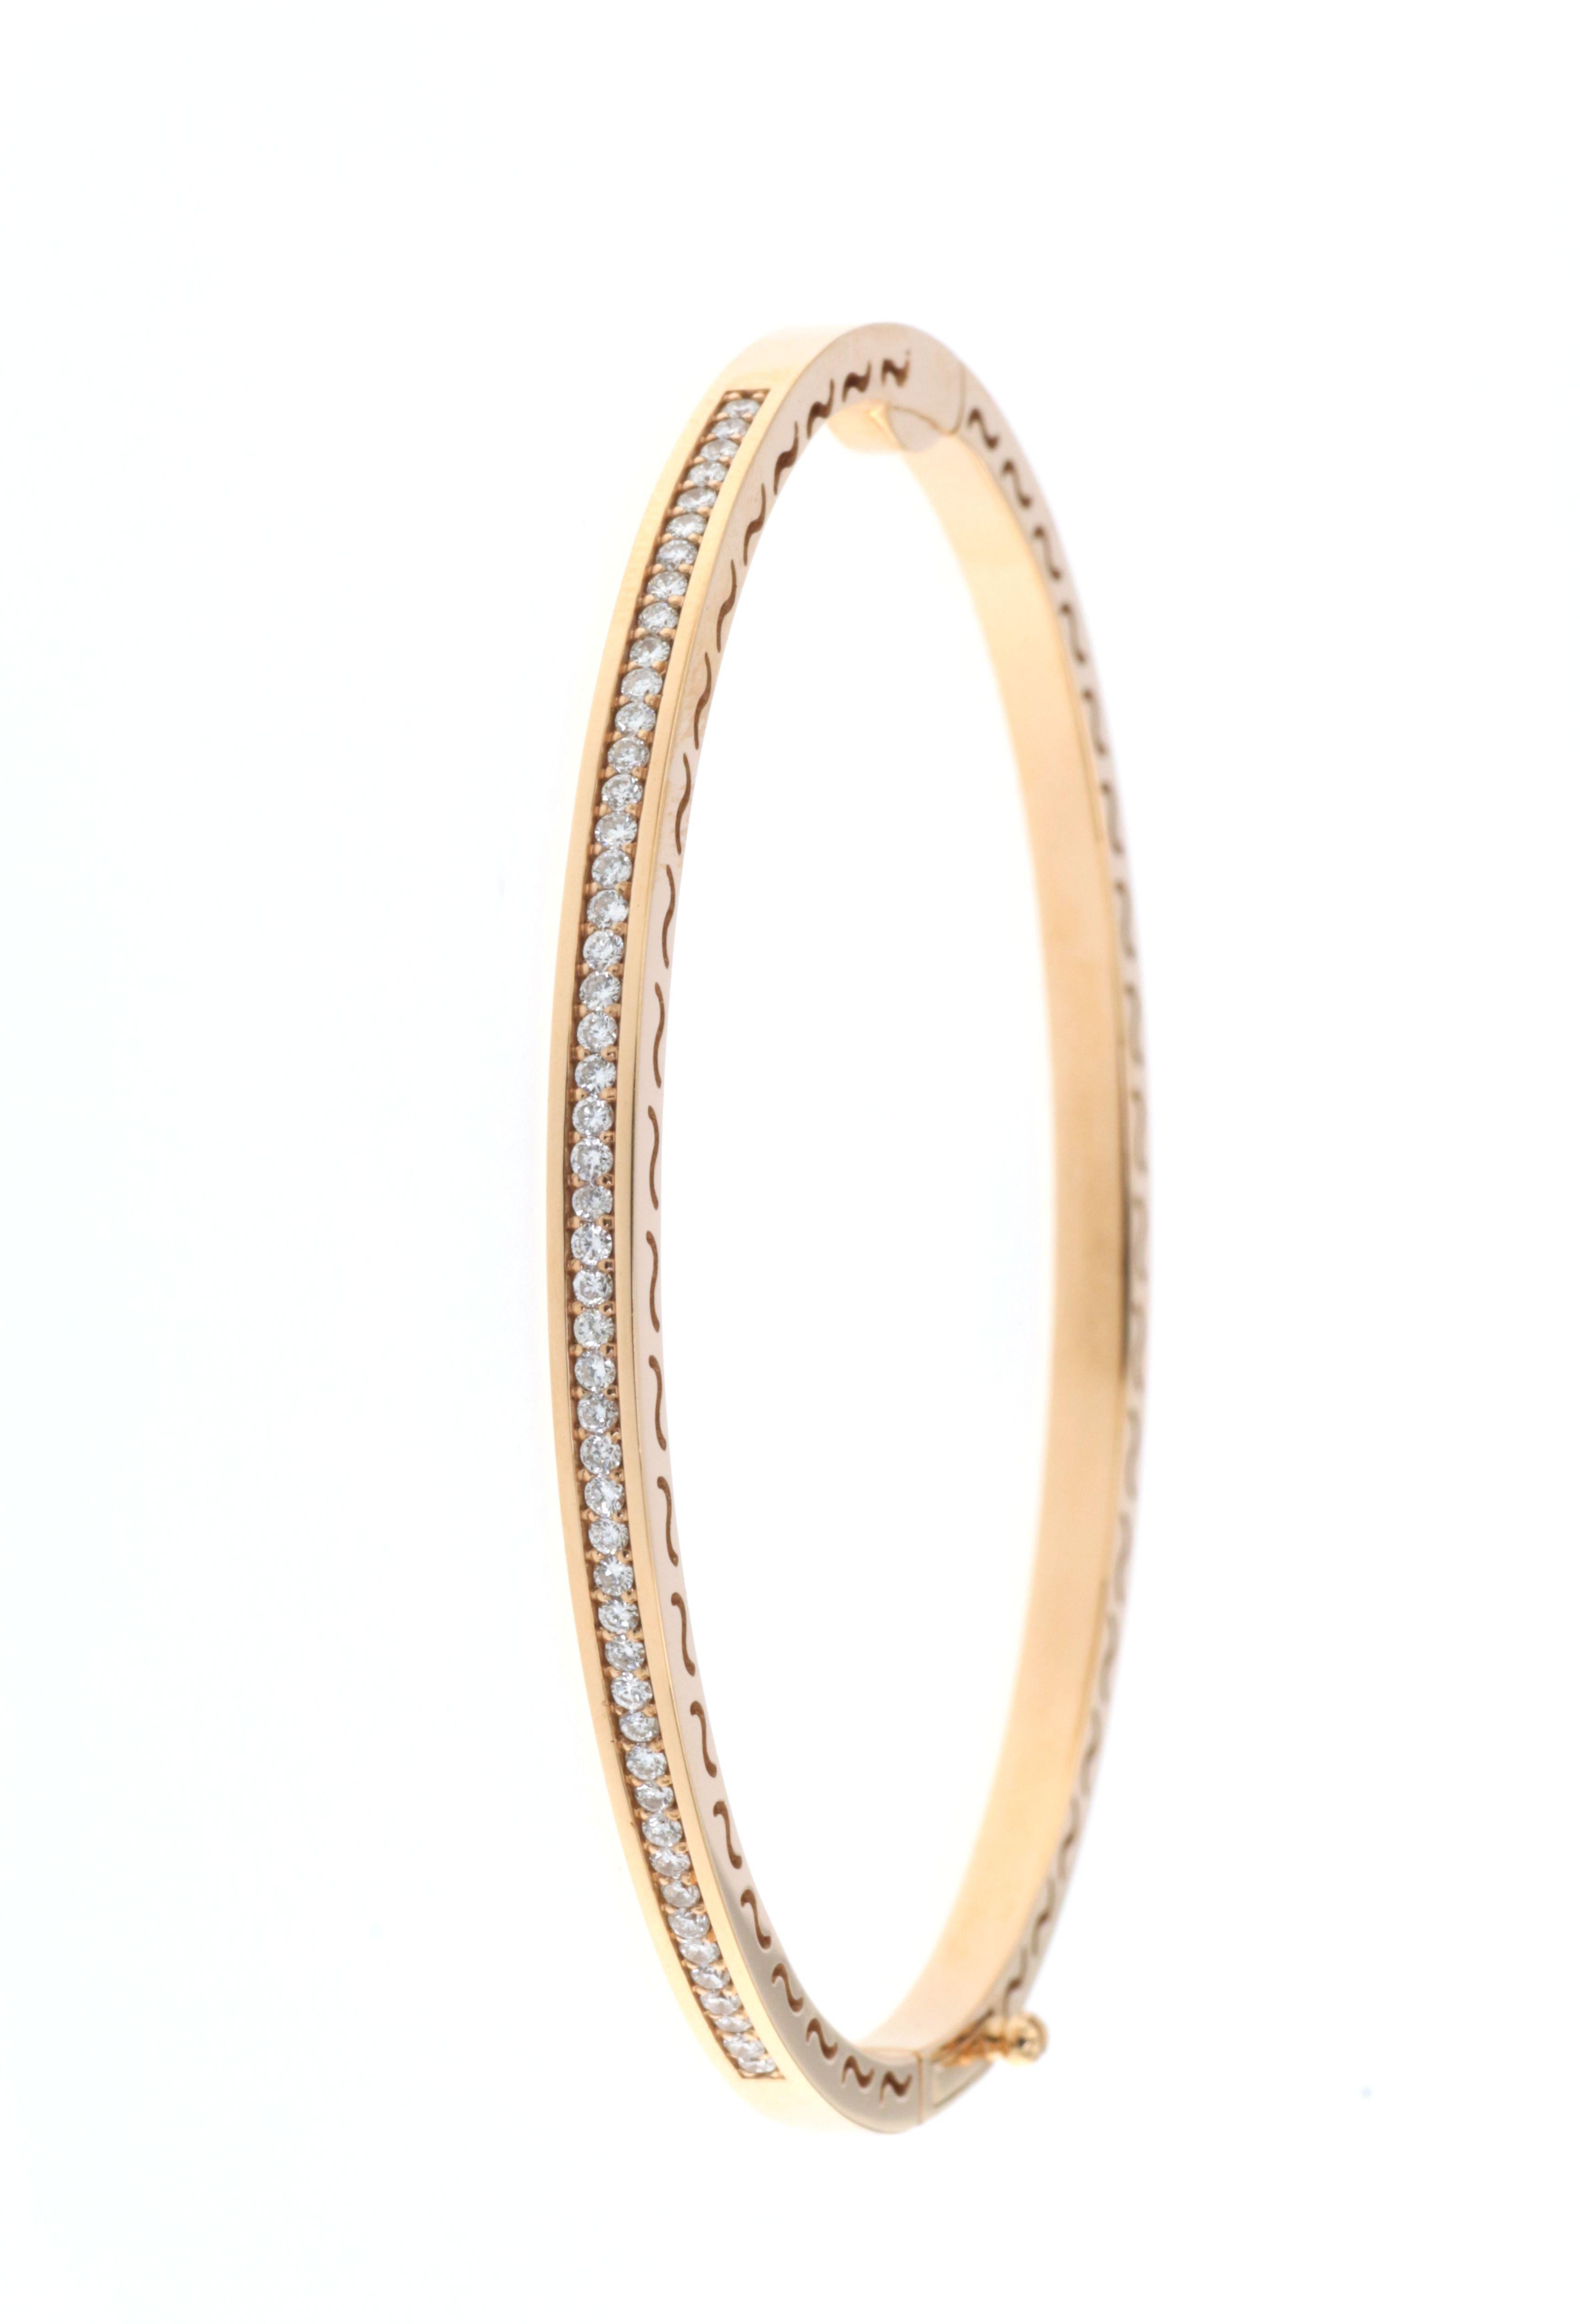 Crafted from the finest 18K rose gold, this bangle bracelet is a study in elegance and simplicity. It features a continuous line of round diamonds, collectively weighing 0.55 carats. The diamonds are carefully set to create a band of light around